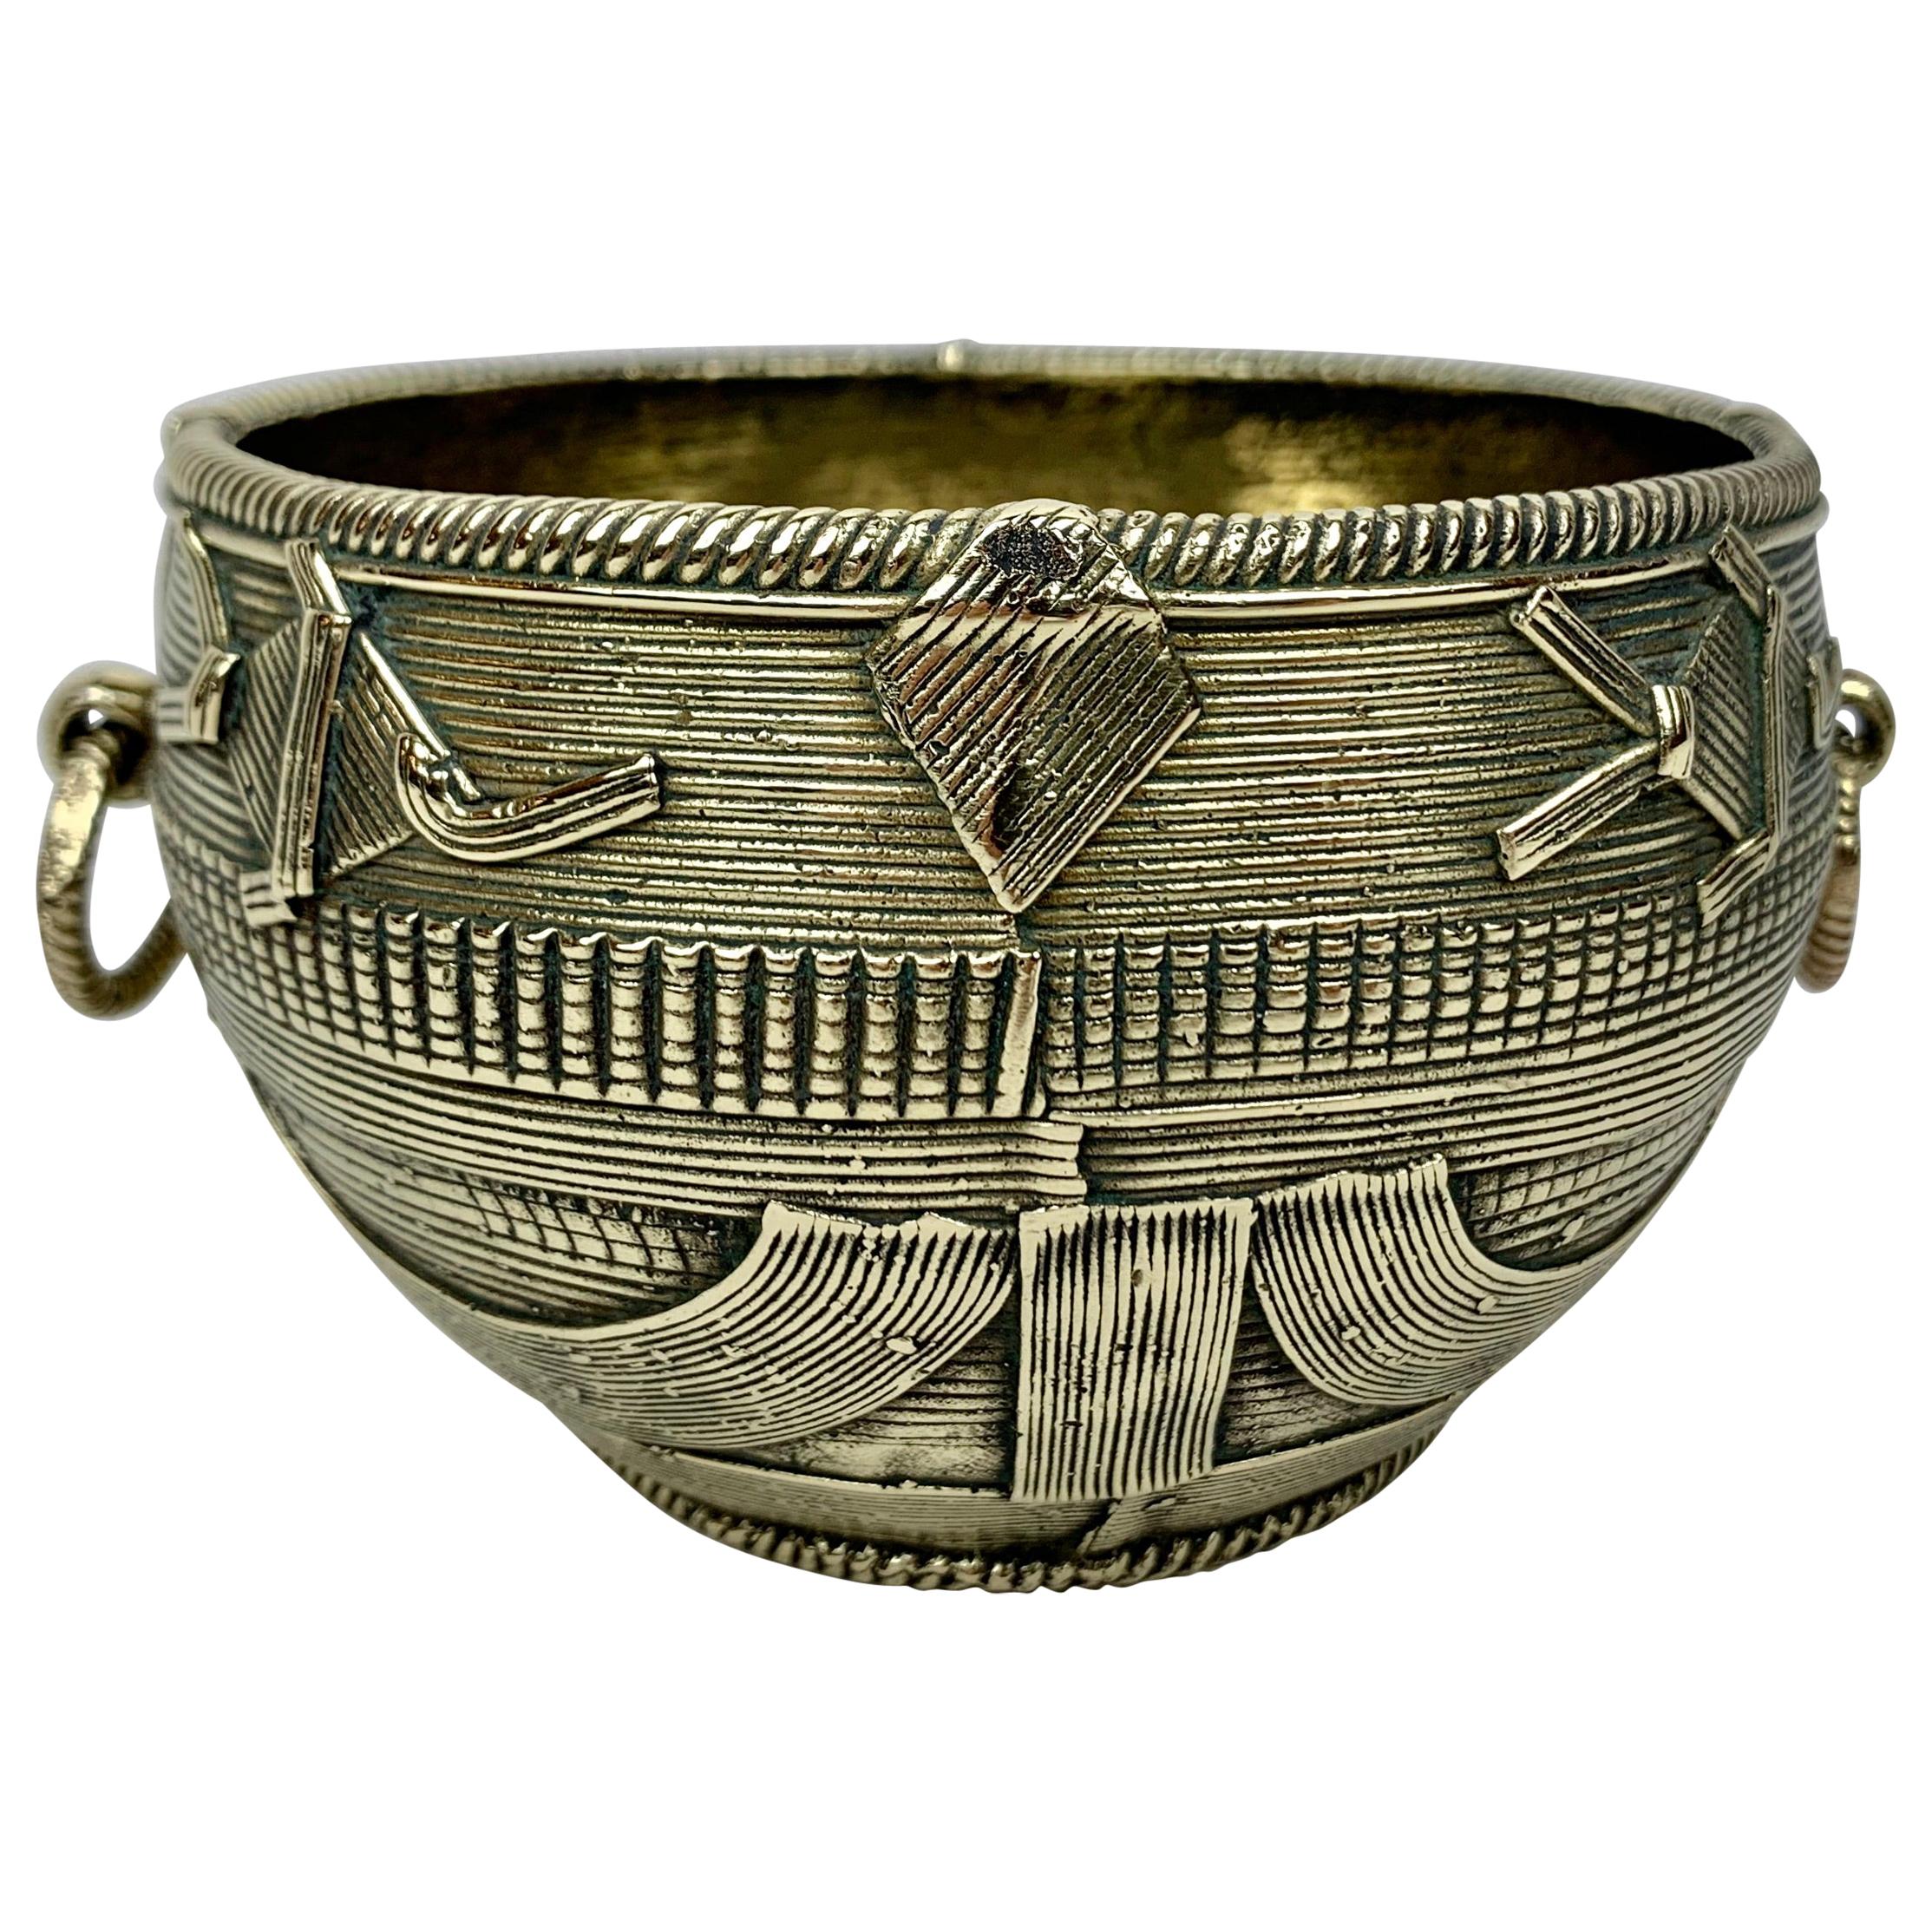 Ashanti Solid Bronze Bowl with Ring Handles-Africa, Early 20th Century